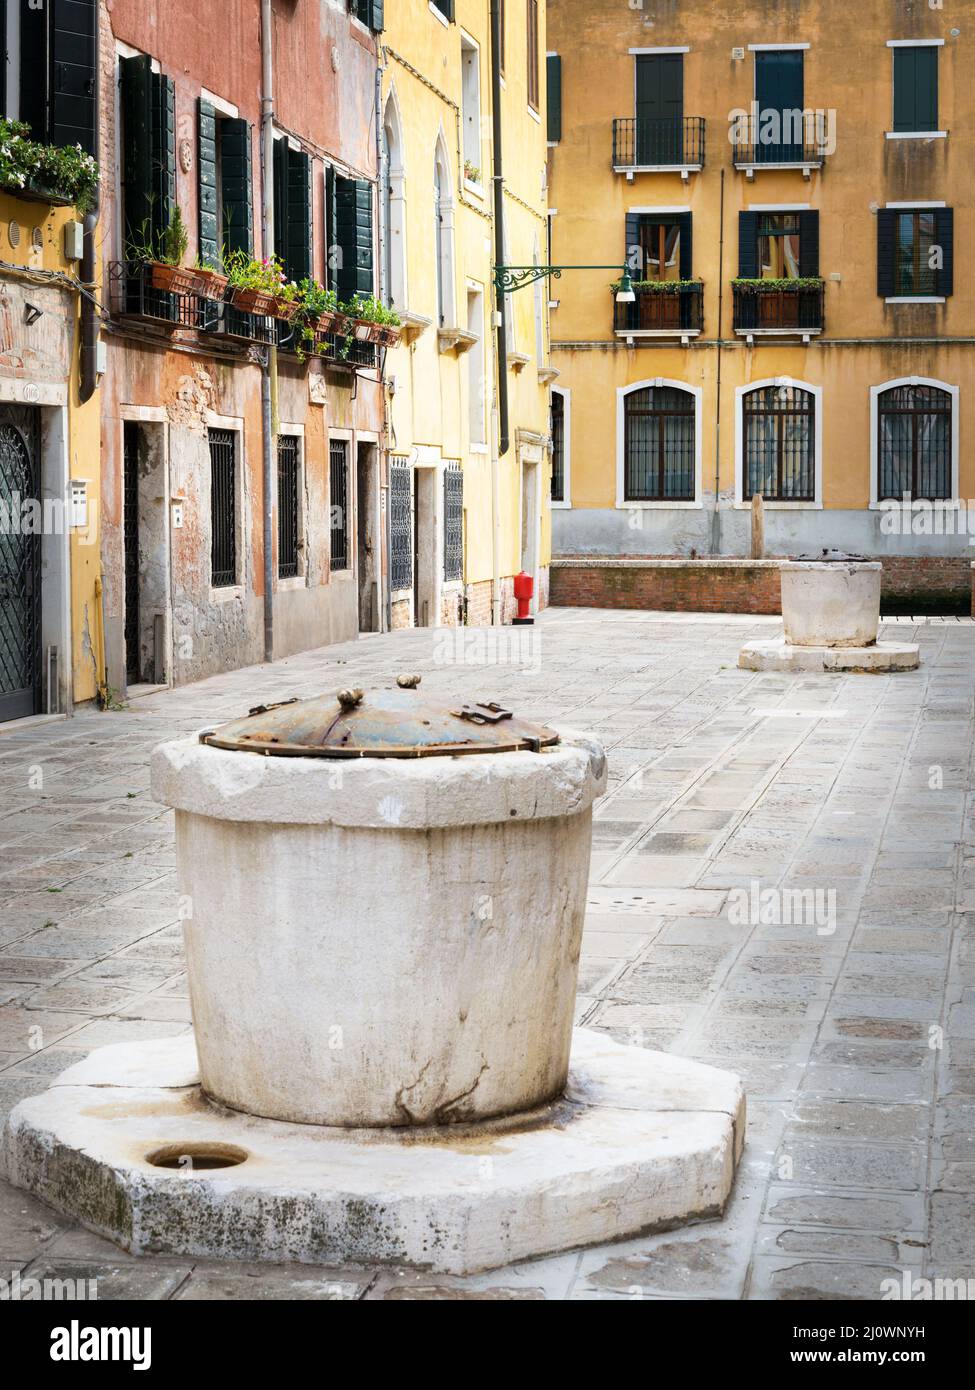 Small square in Venice without any people during italian lockdown crisis COVID-19, Italy Stock Photo